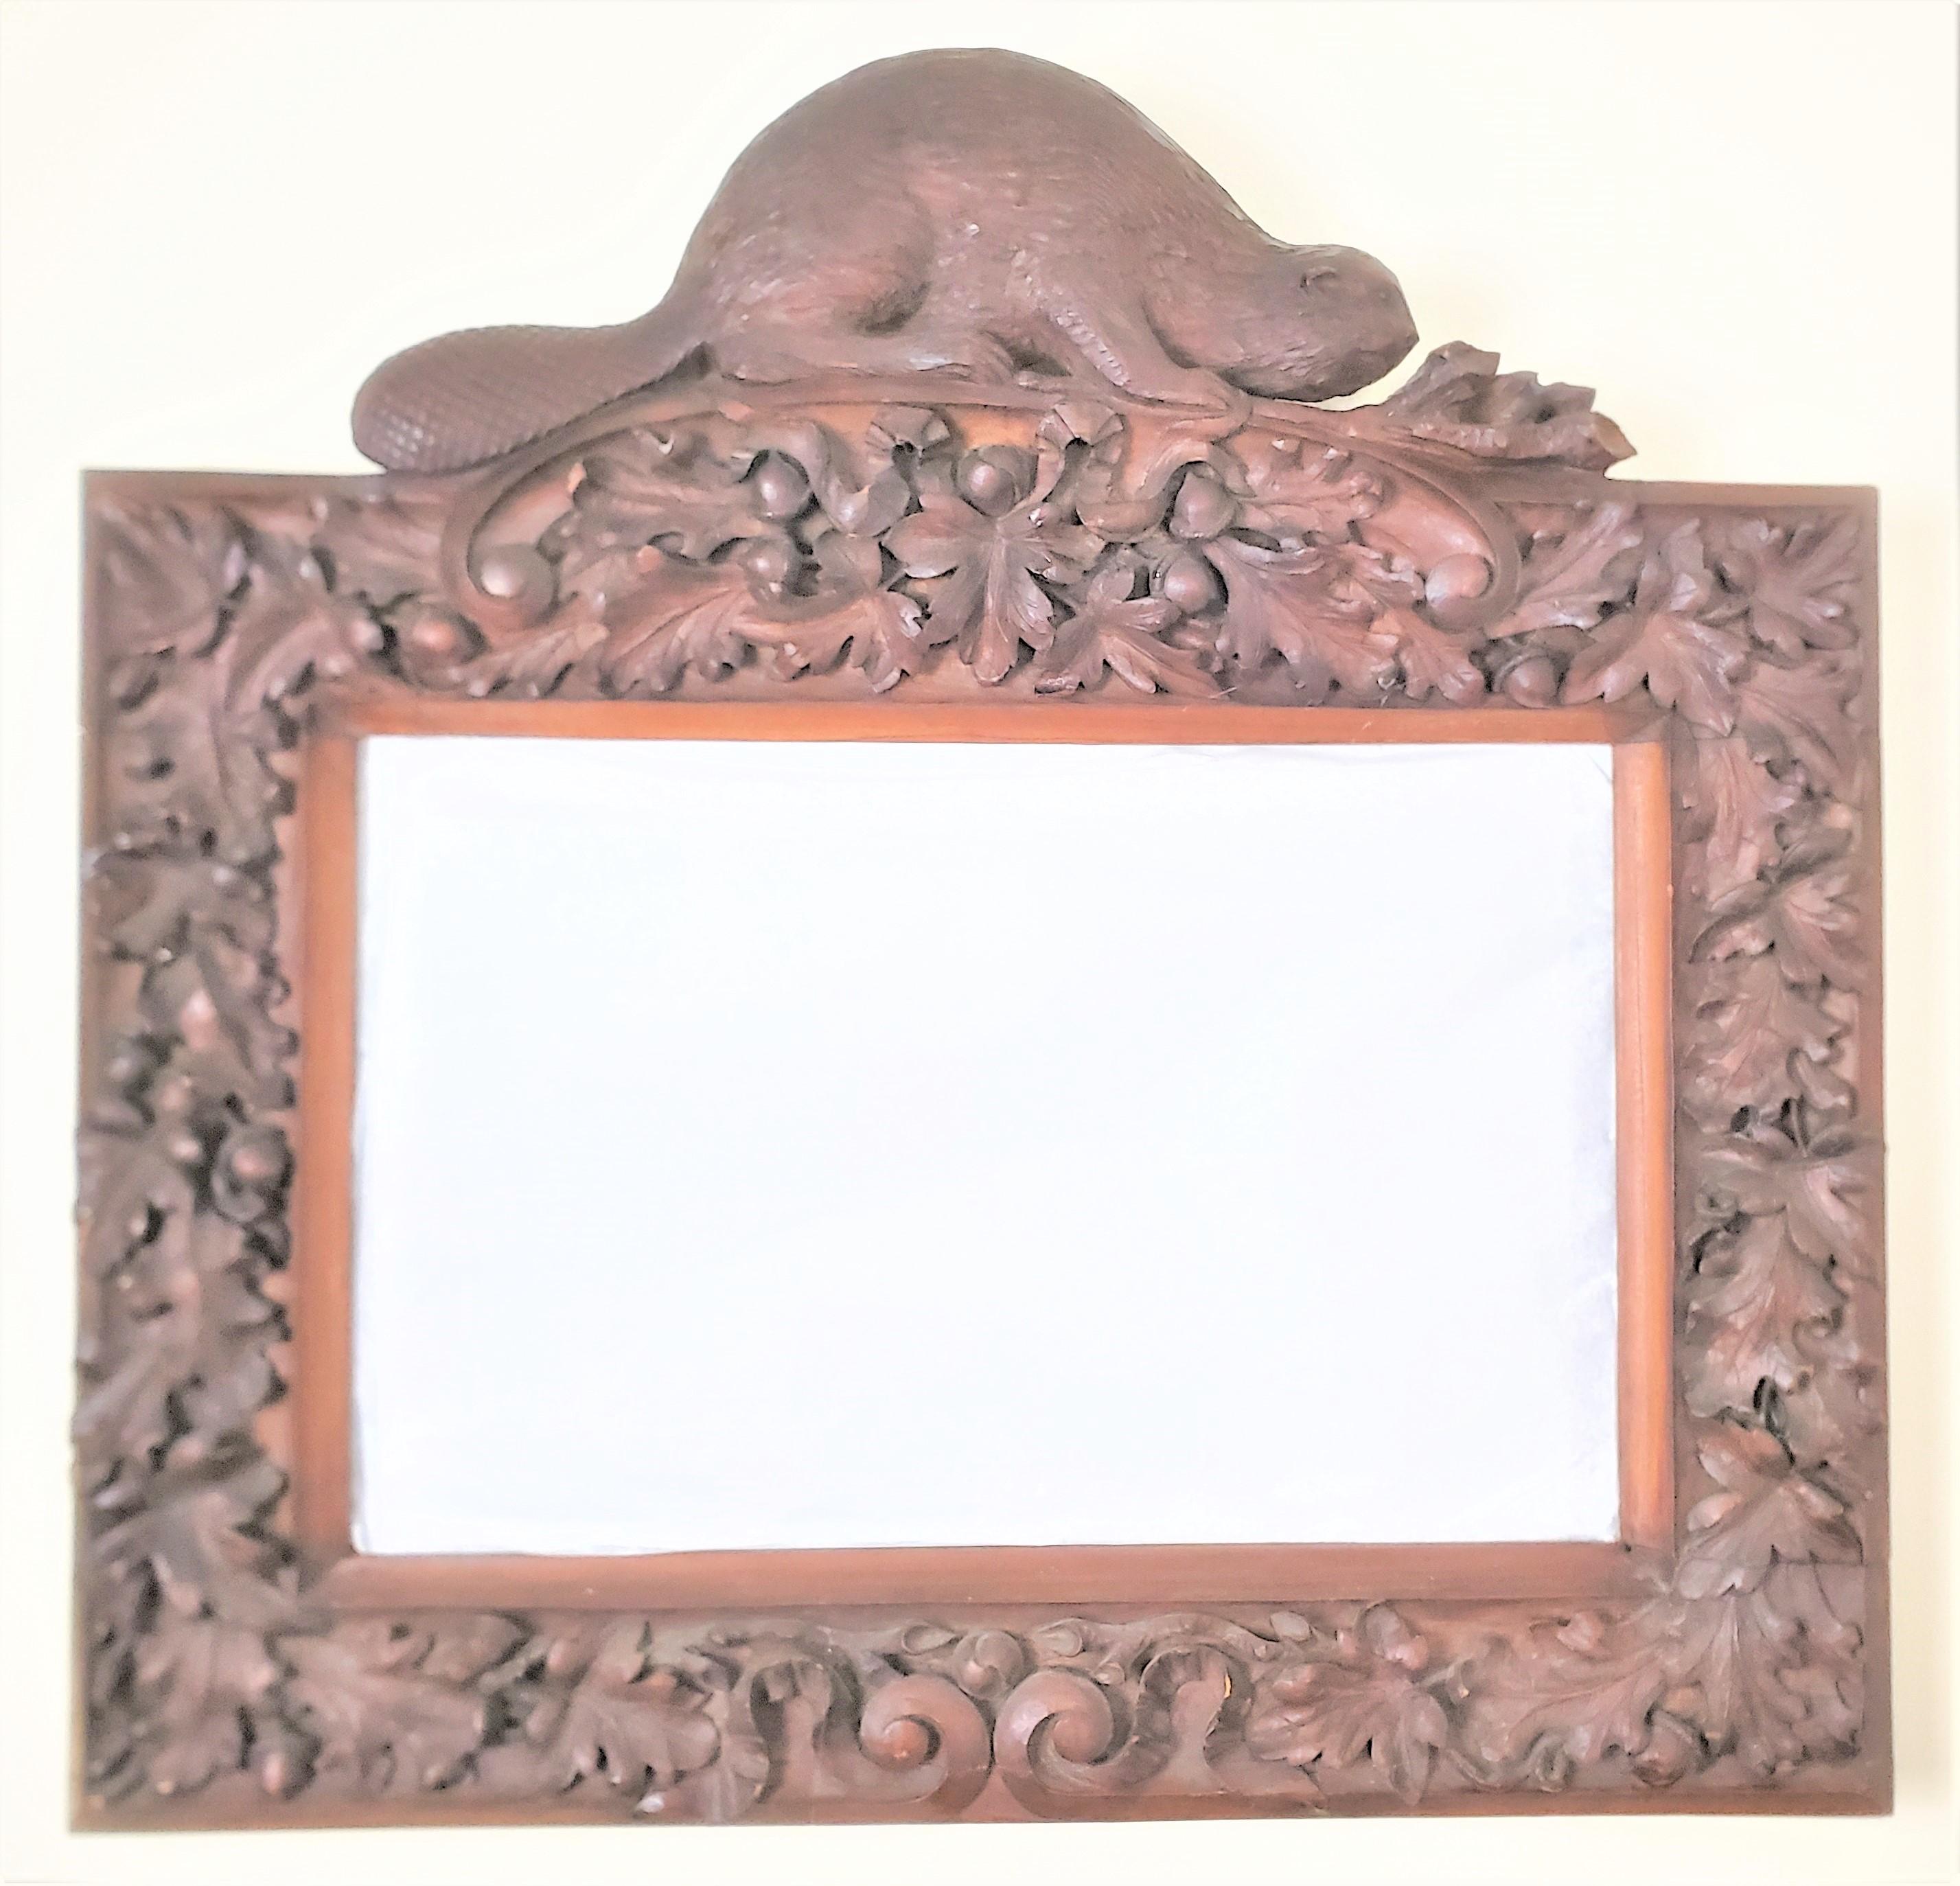 This antique hand-carved frame is unsigned, but originated from Canada and dates to approximately 1880 and done in the period Folk Art style. The frame is composed of solid walnut and features a large sculpted beaver at the top sitting on a branch.